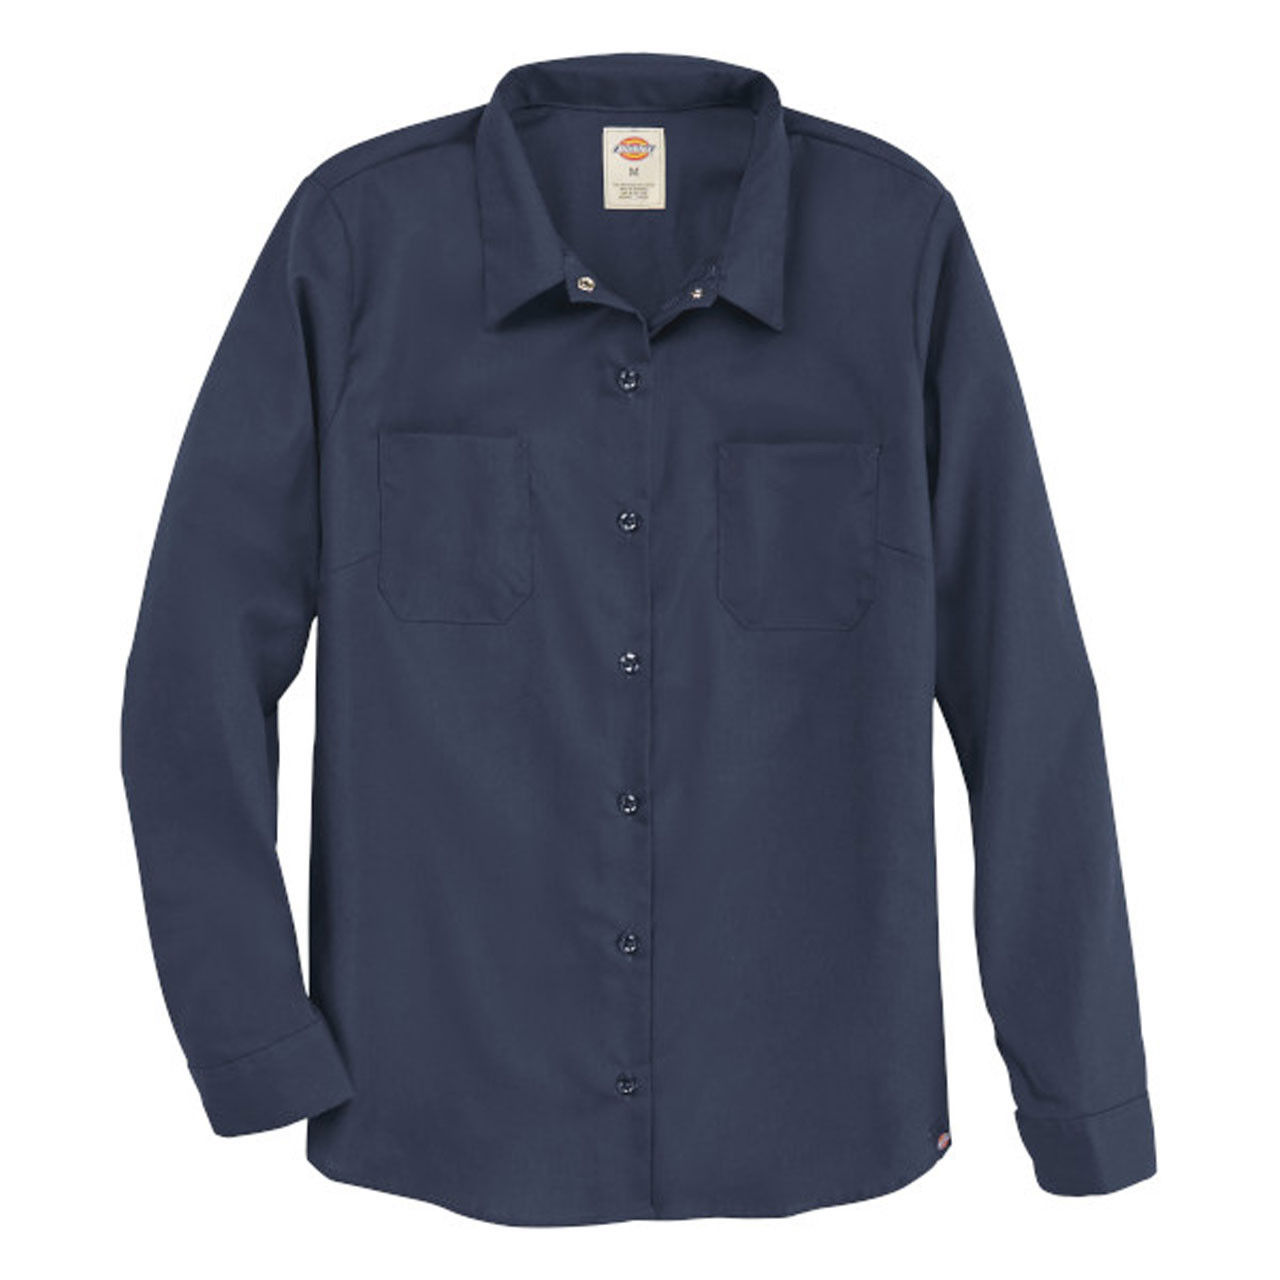 Is this a dickie long sleeve work shirt style?